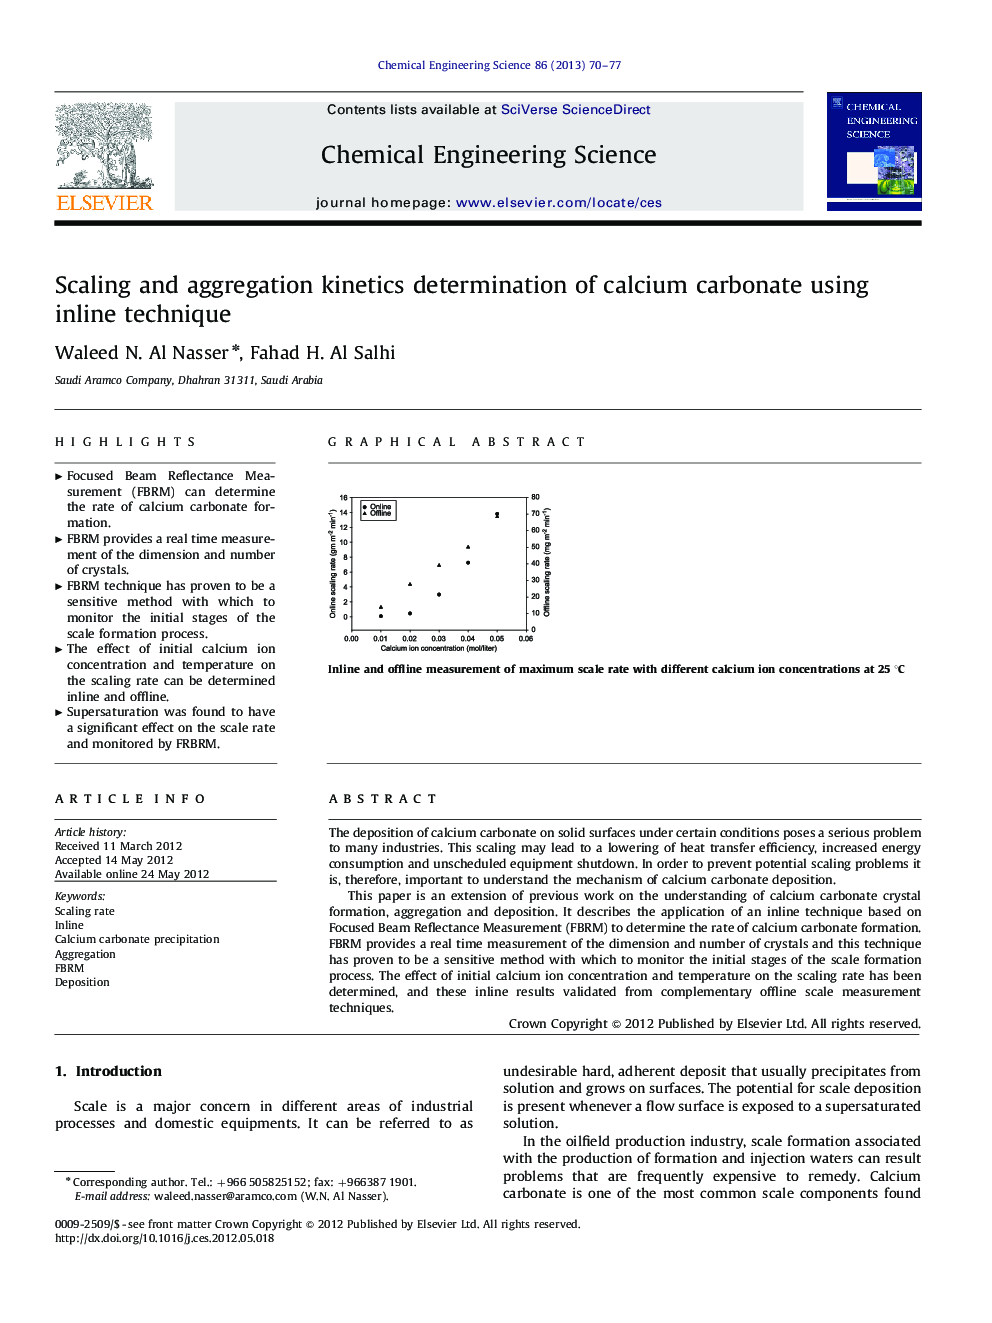 Scaling and aggregation kinetics determination of calcium carbonate using inline technique